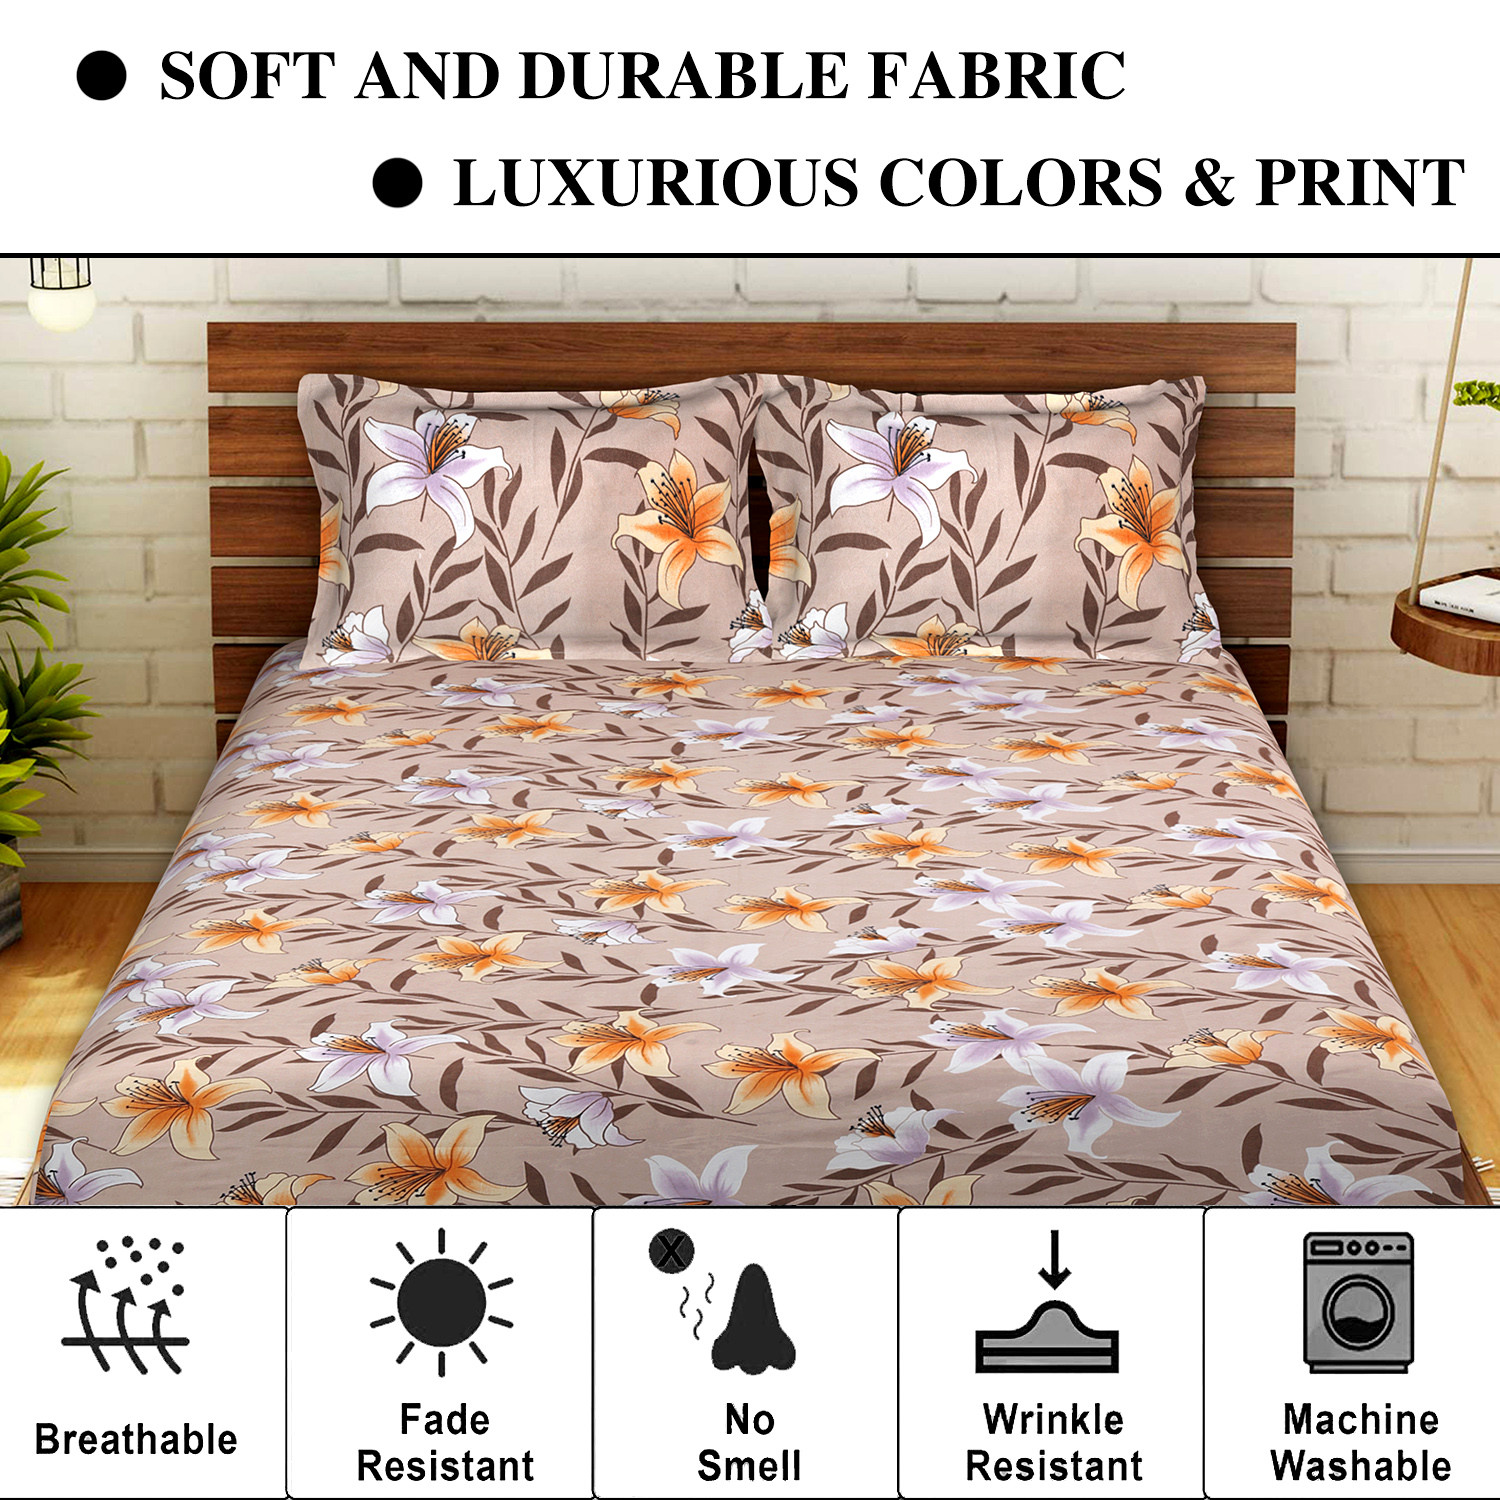 Kuber Industries Glace Cotton Flower Print Double Bedsheet With 2 Pillow Covers,90x108,(Light Brown)